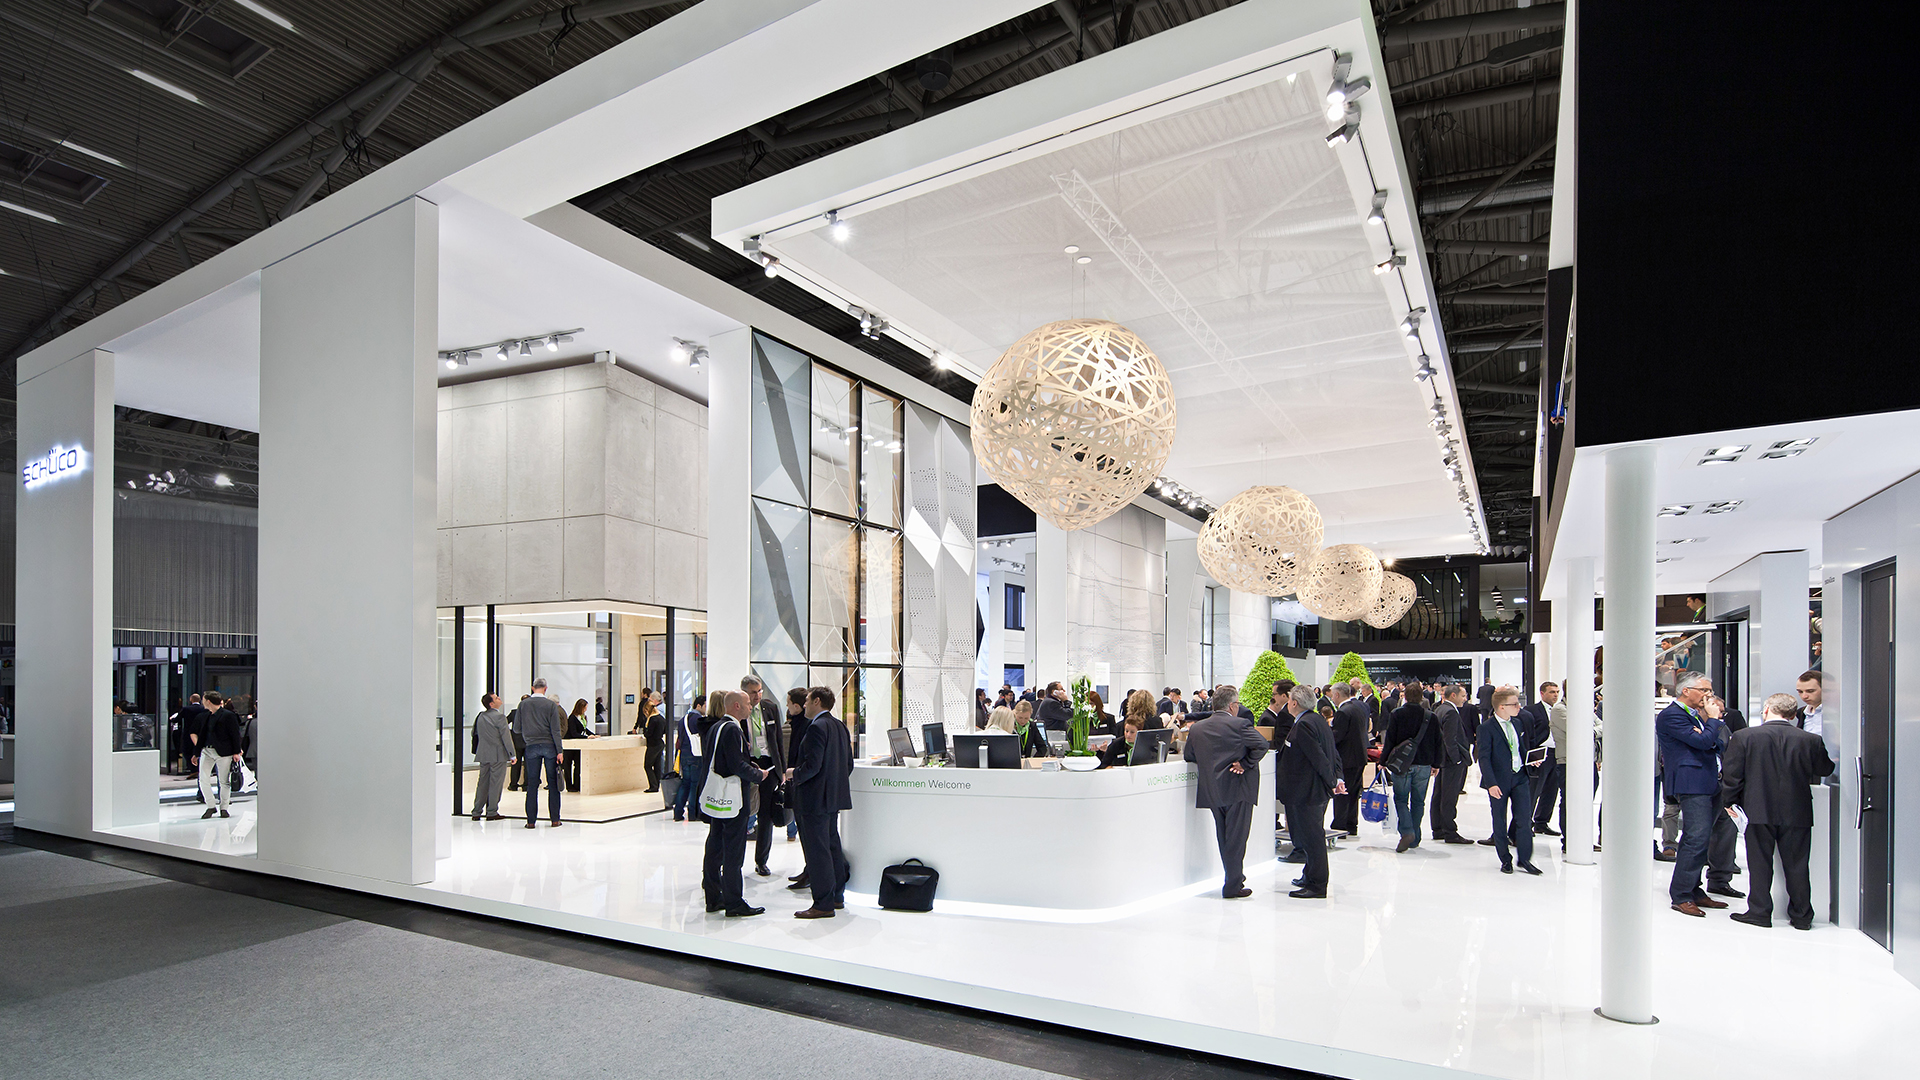 Dart stages the Schüco fair stand at the Bau 2015